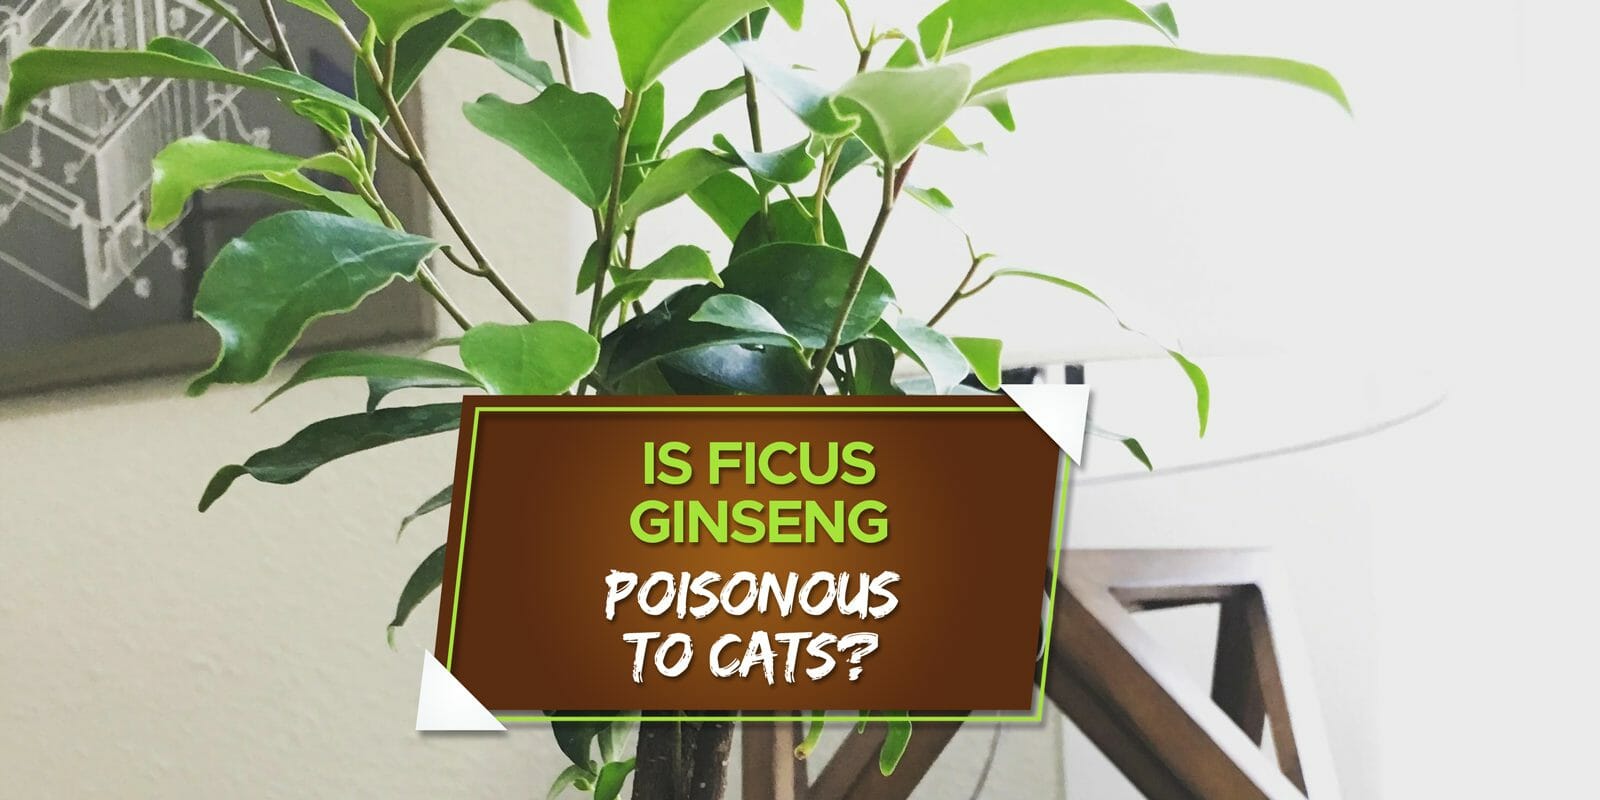 is ficus ginseng poisonous to cats